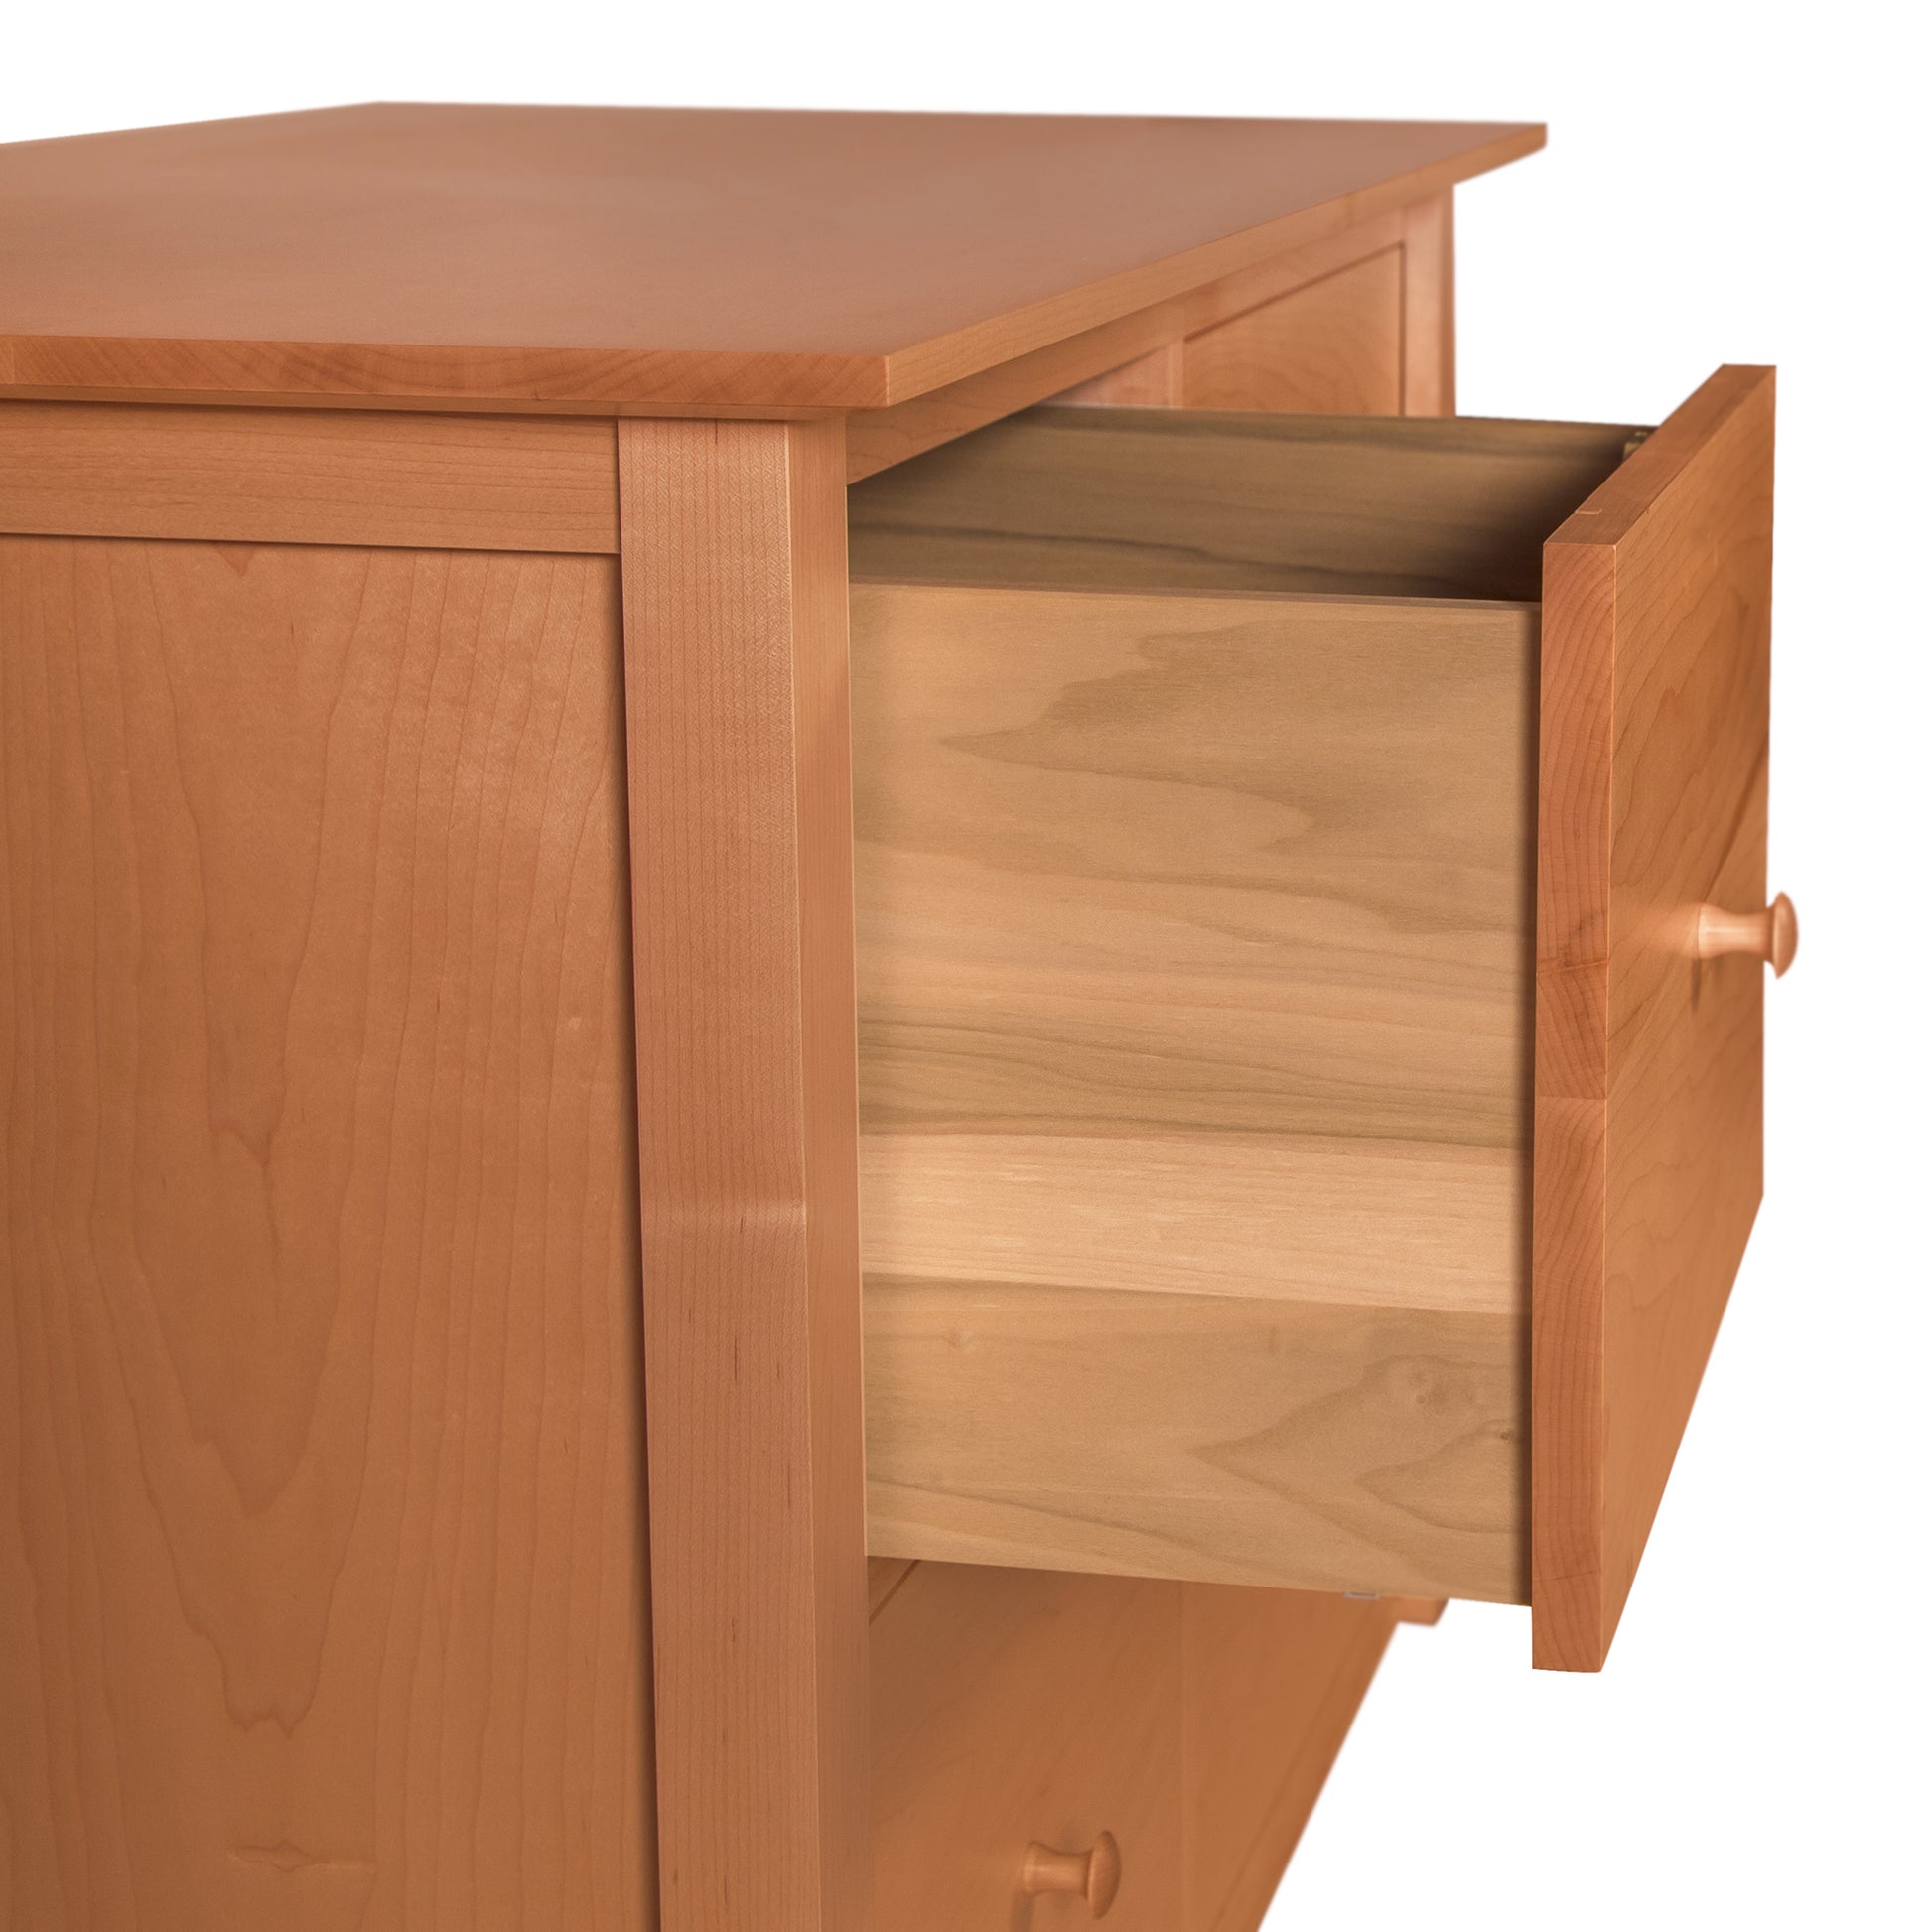 Maple Corner Woodworks American Shaker 4-Drawer File Credenza crafted from premium hardwood, showcasing its design and build quality for office organization.